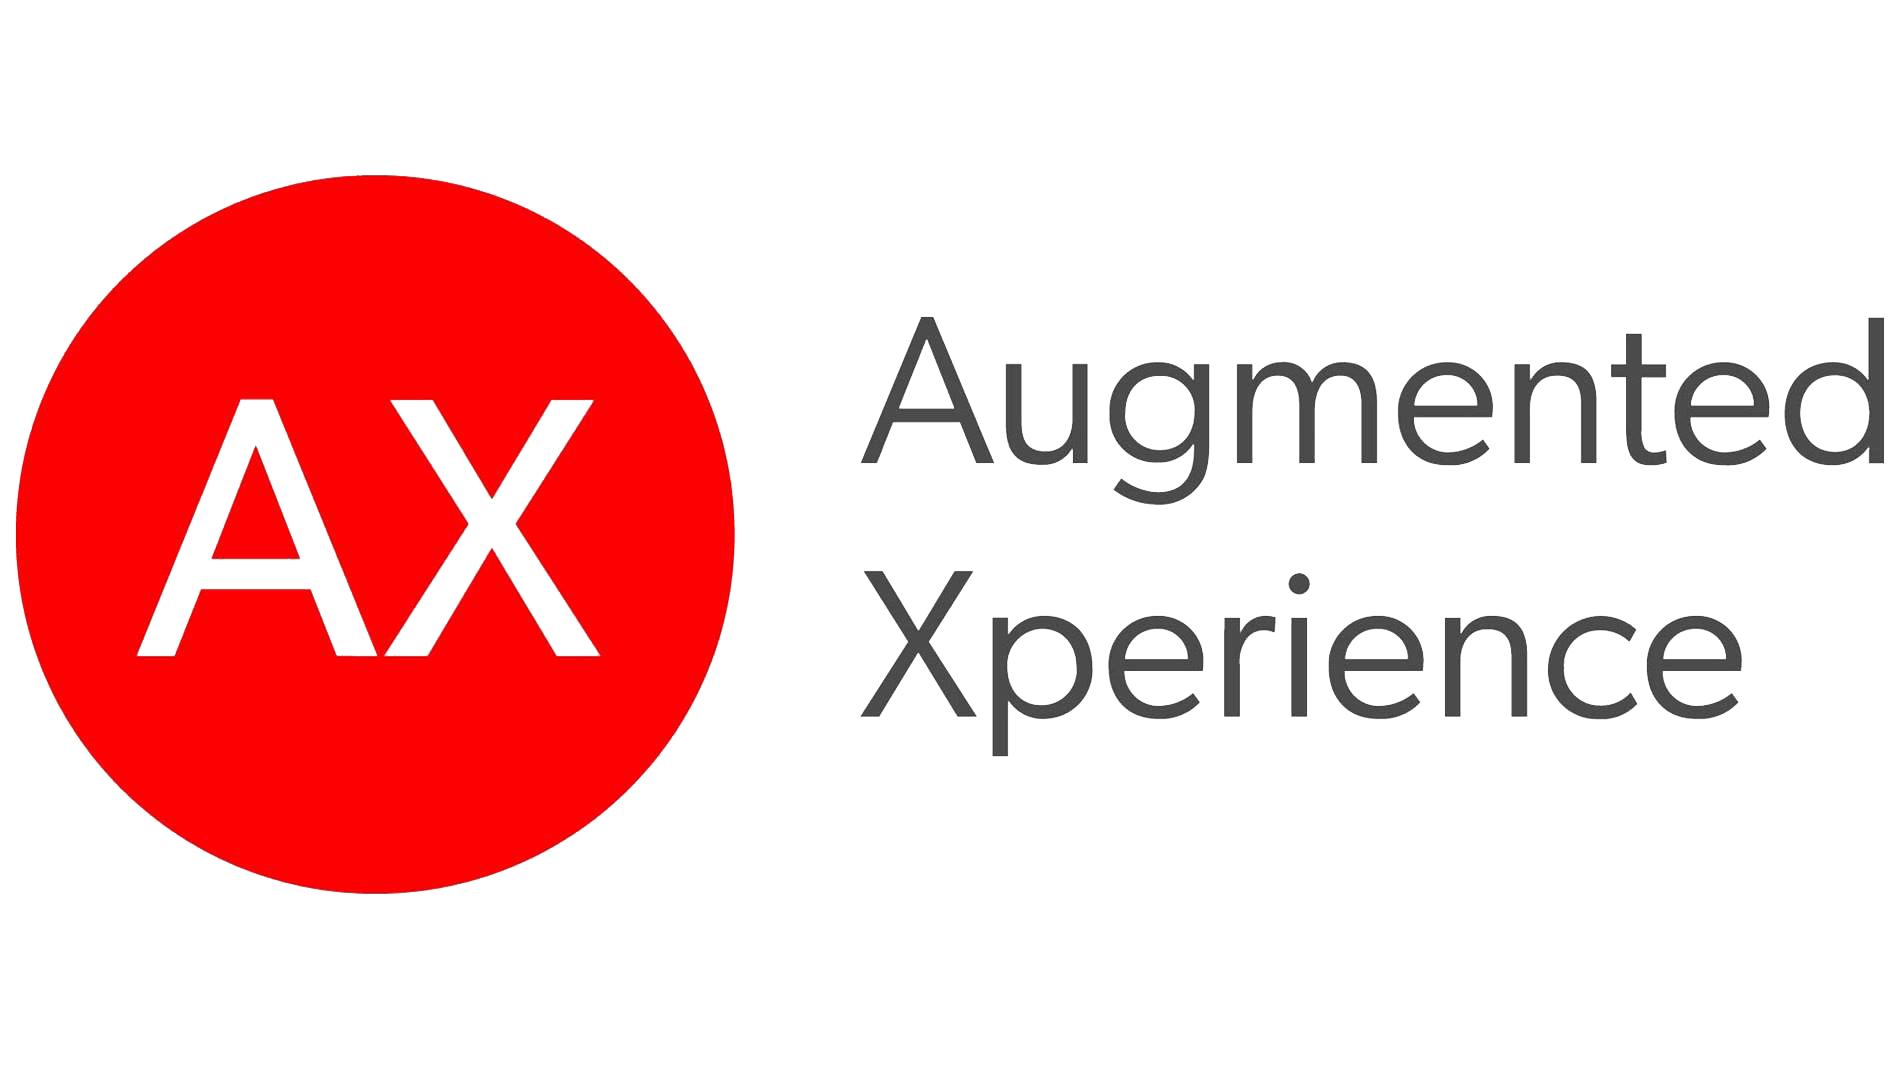 Augmented Xperience